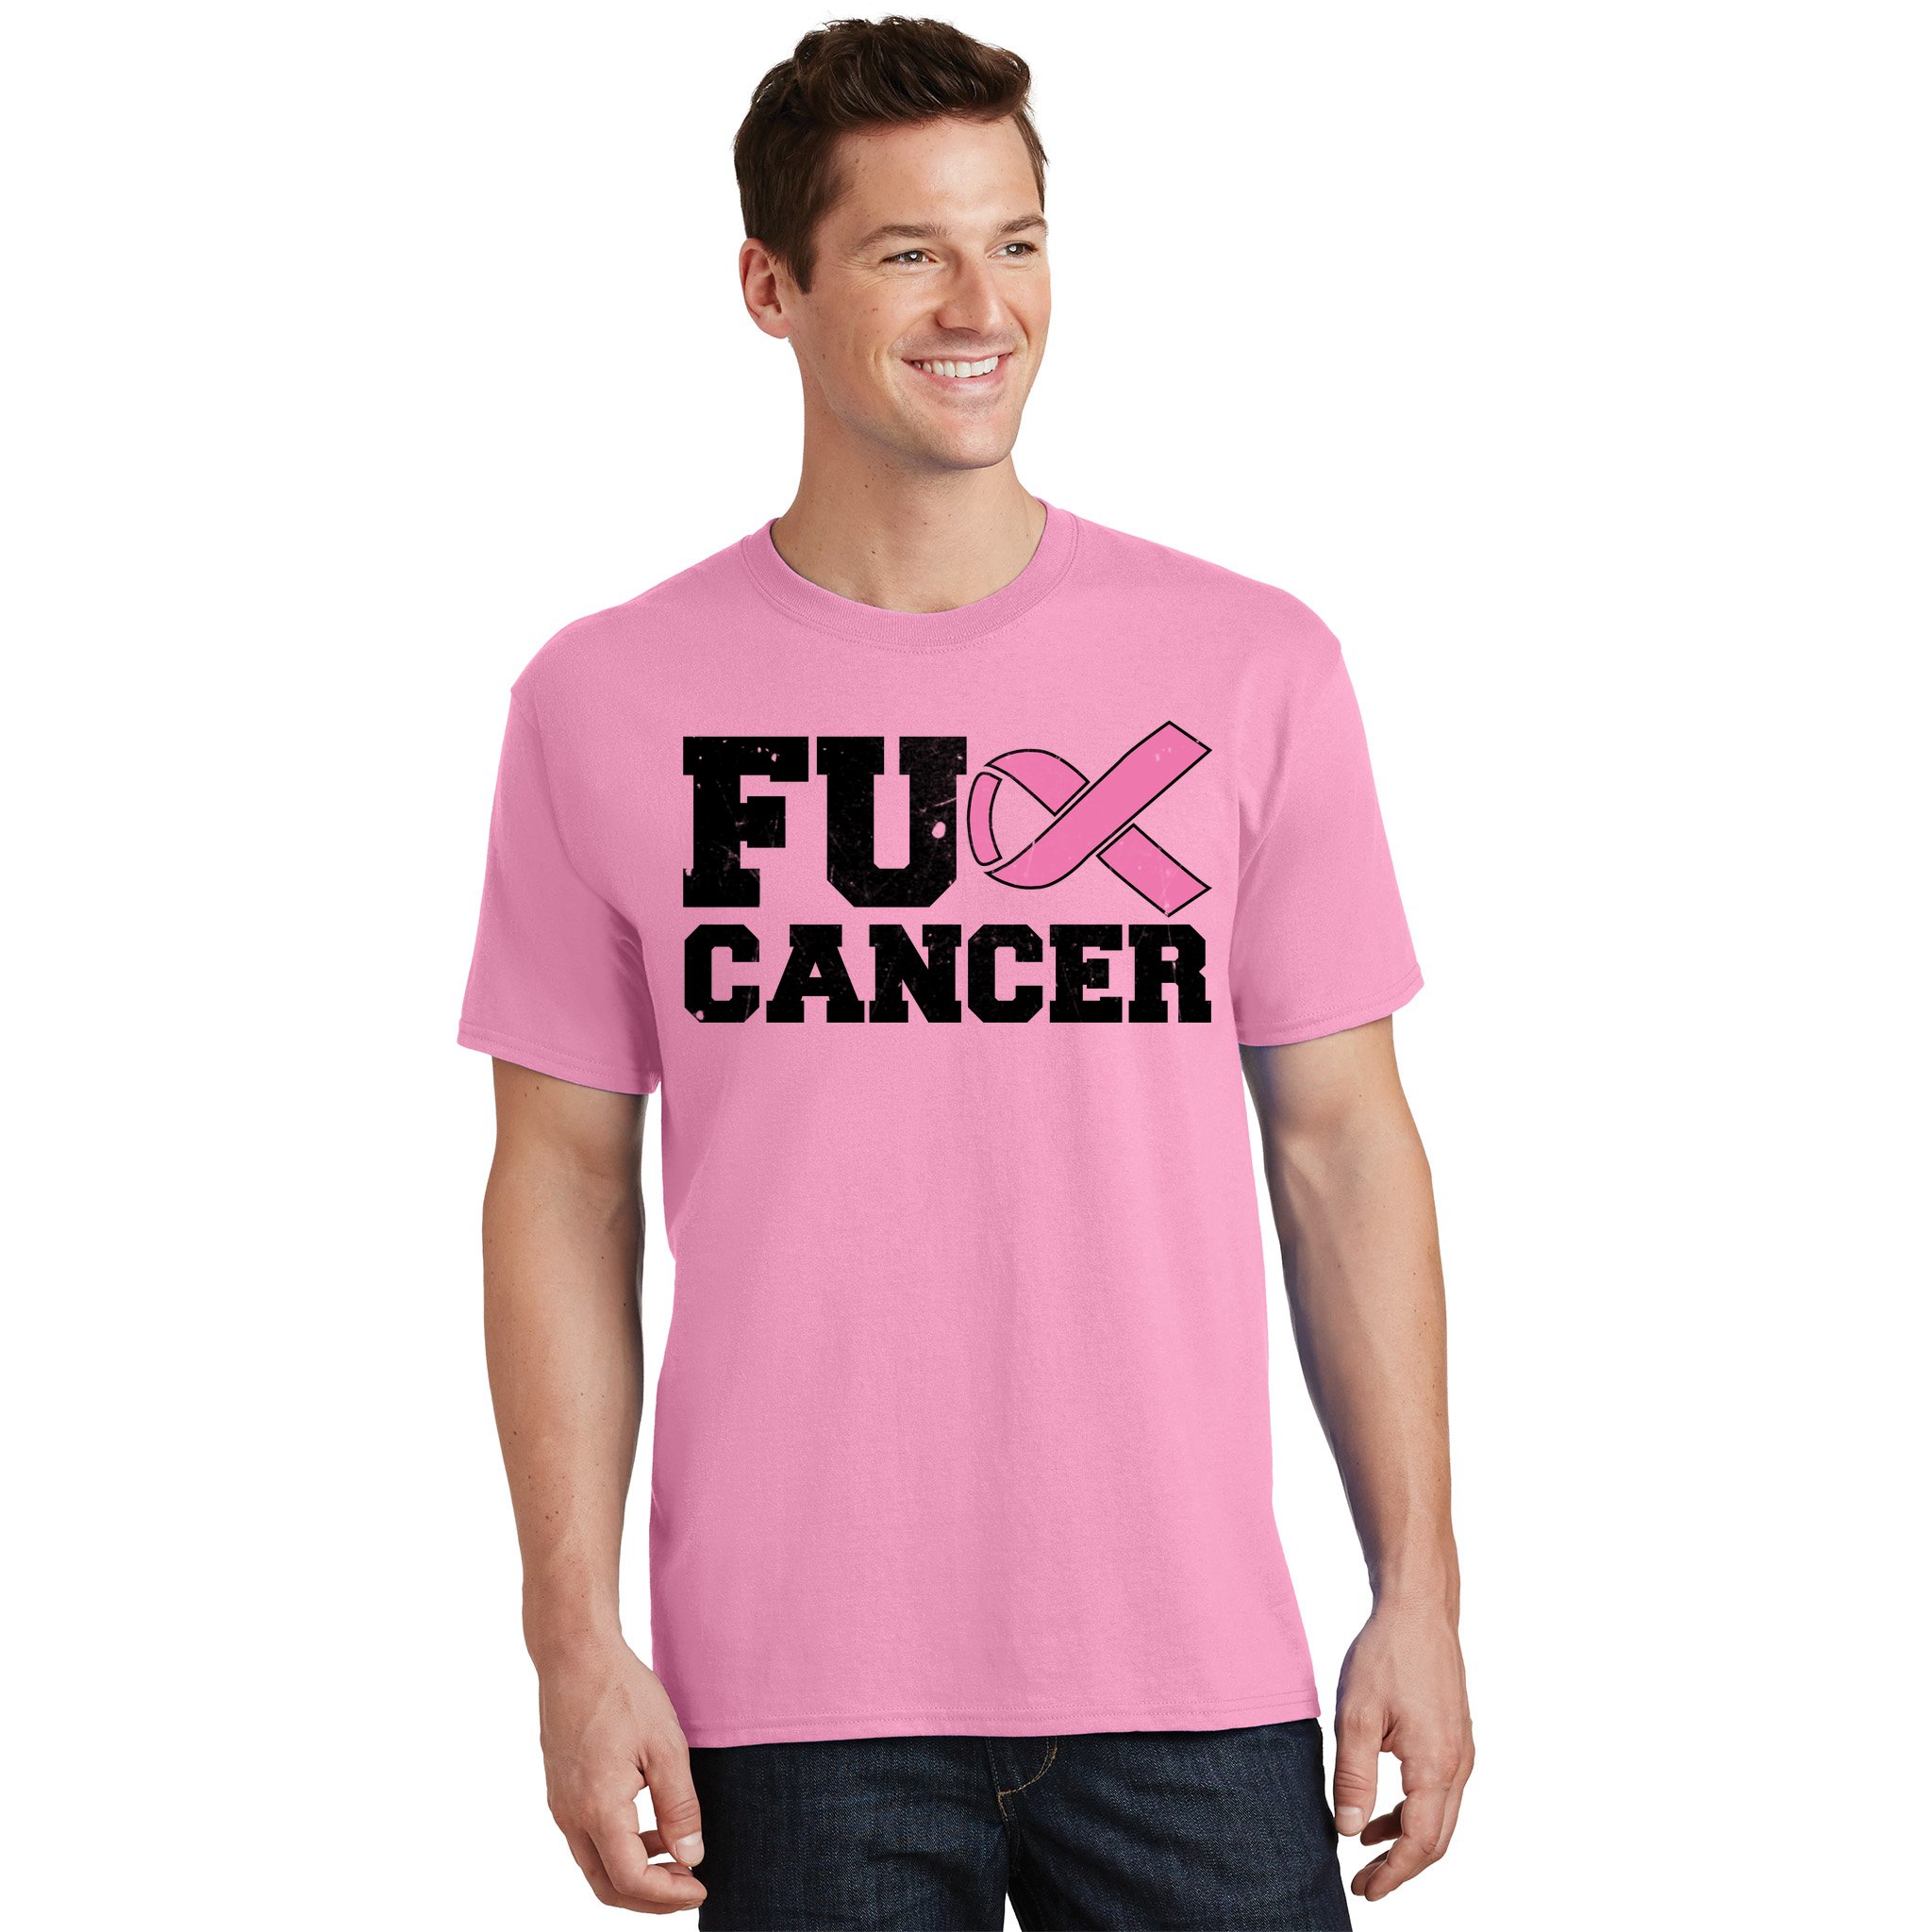 Breast Cancer Cancer Warrior Tee Not Dead Yet Just Feel Like It Shirt Cancer Survivor Tee Sarcastic Cancer Gift Funny Cancer T-shirt